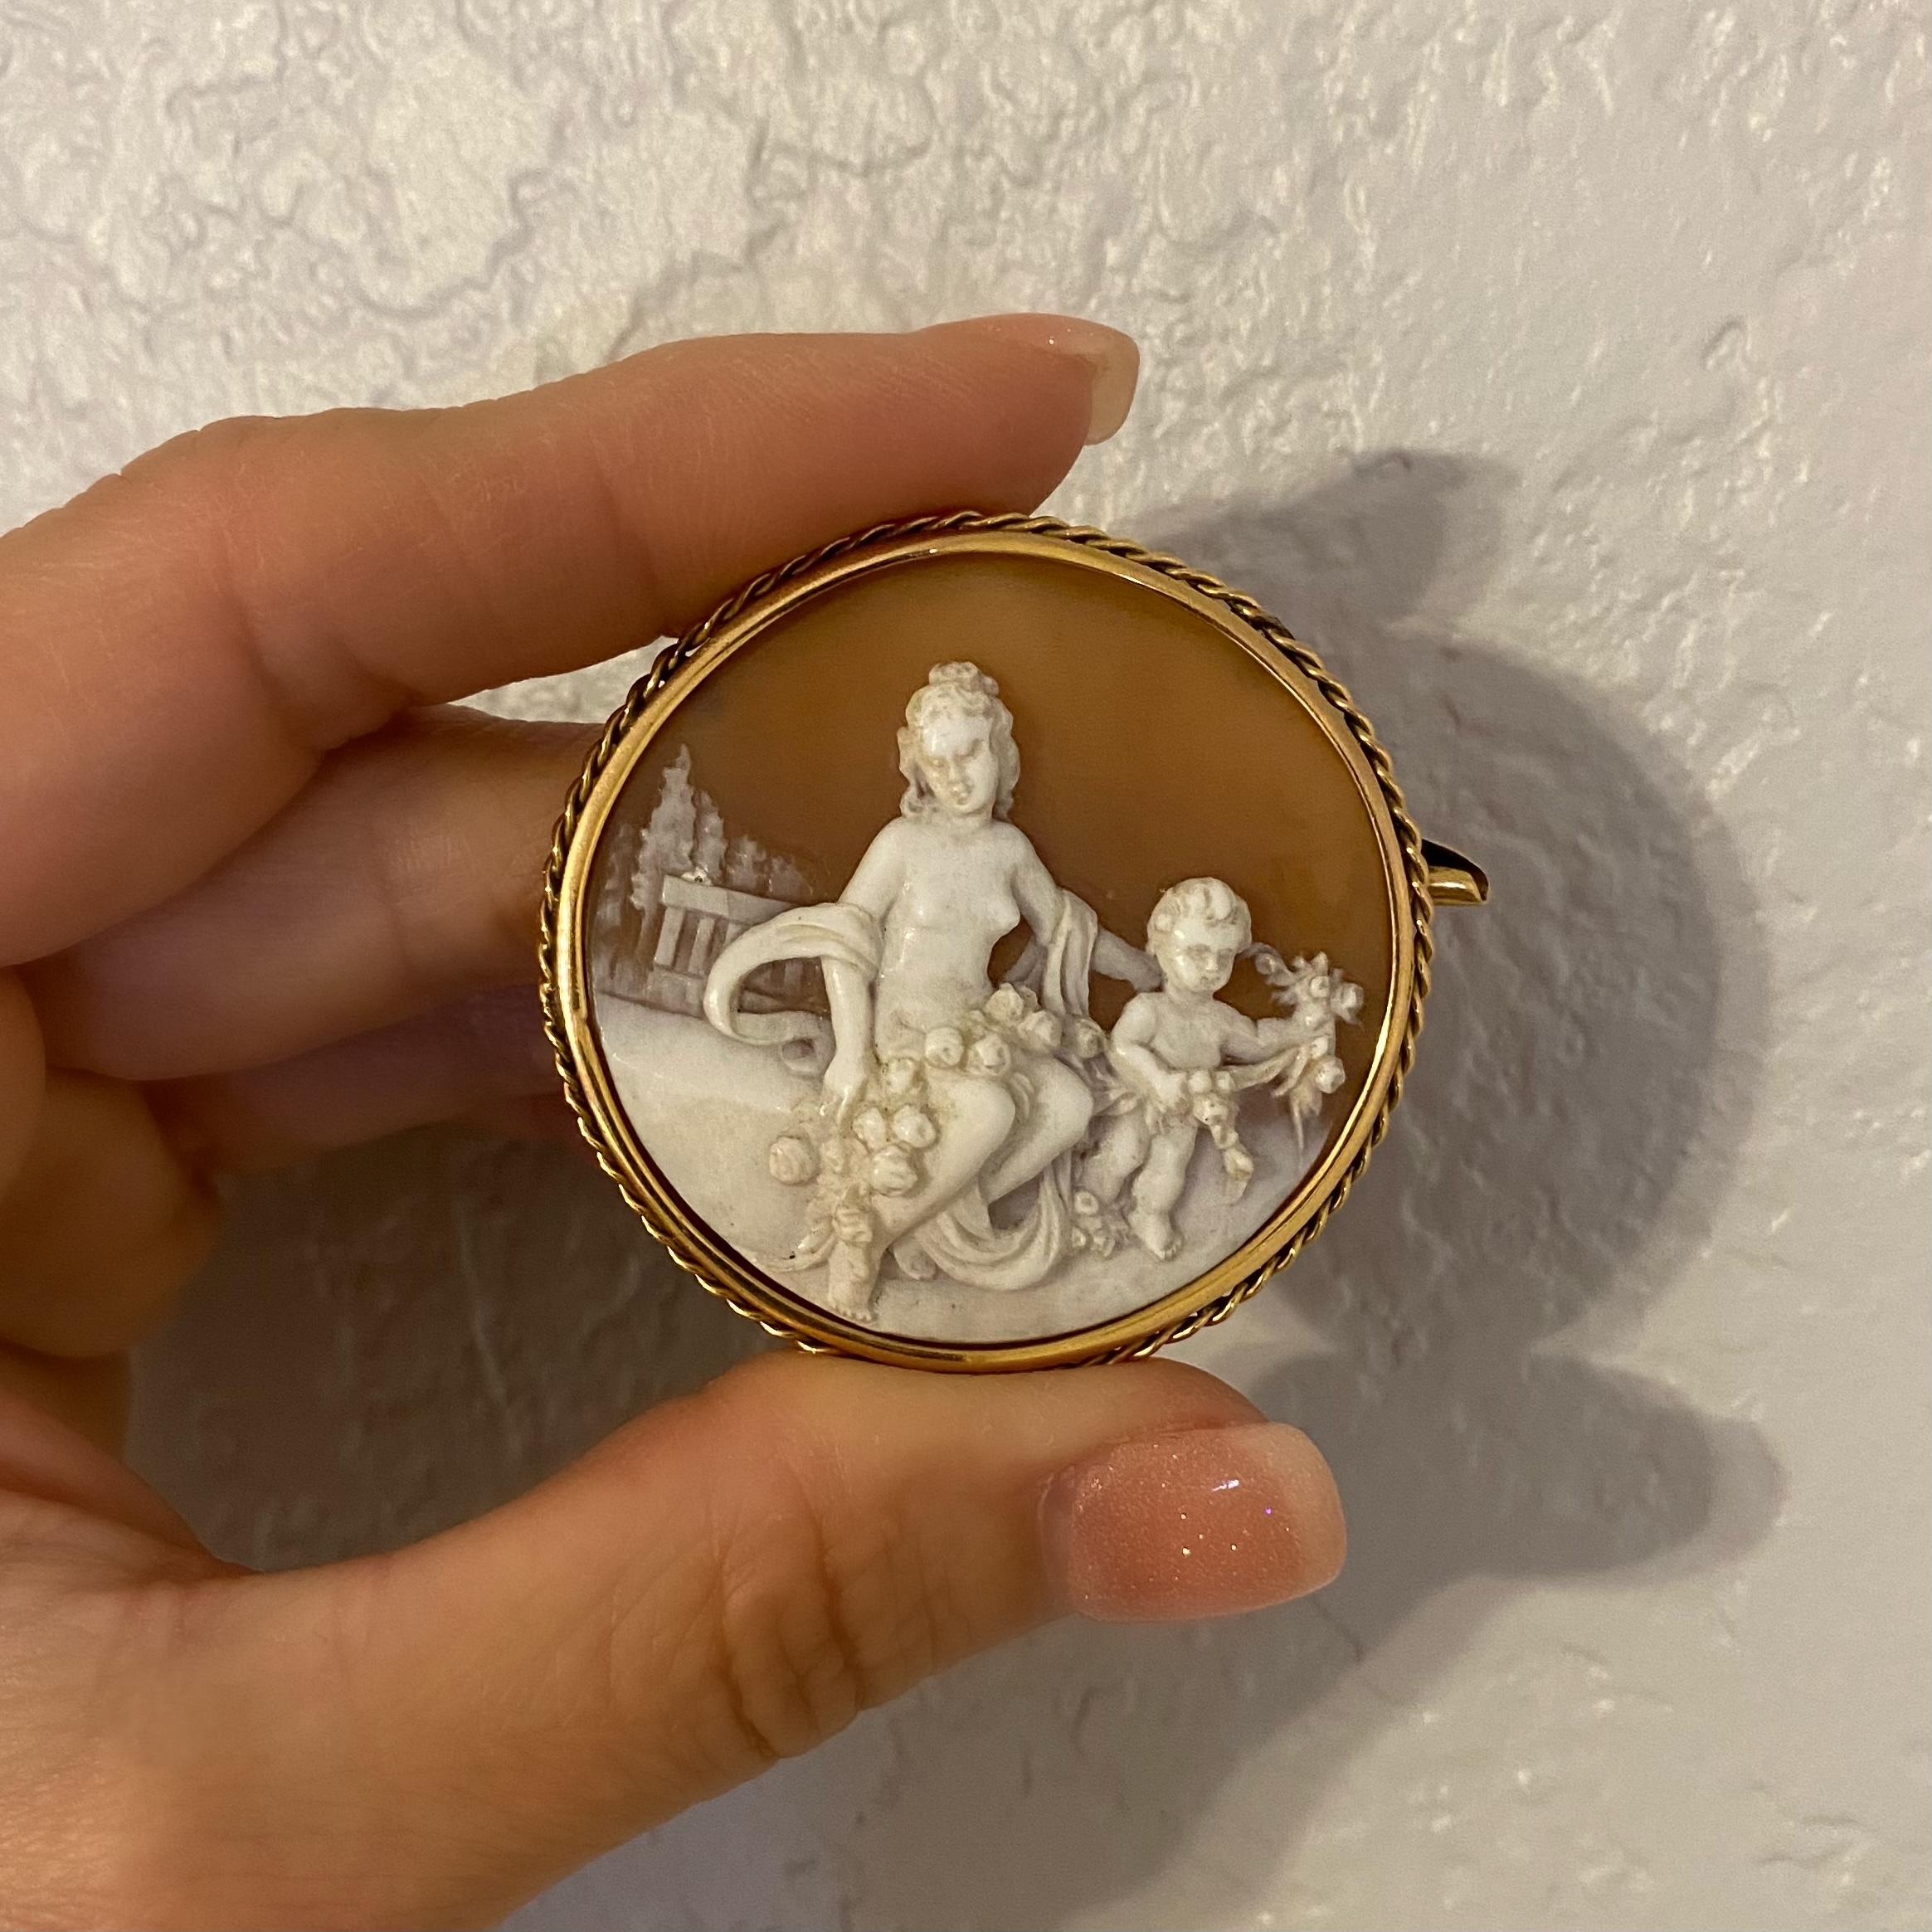 Simply Beautiful! Stylish Antique Hand carved Cameo Brooch depicting Mother and Child in Garden setting. Hand Carved in High Relief with exquisite detail. Set in a solid 18 Karat yellow Gold frame. An added cover over the end of the pin. Measuring